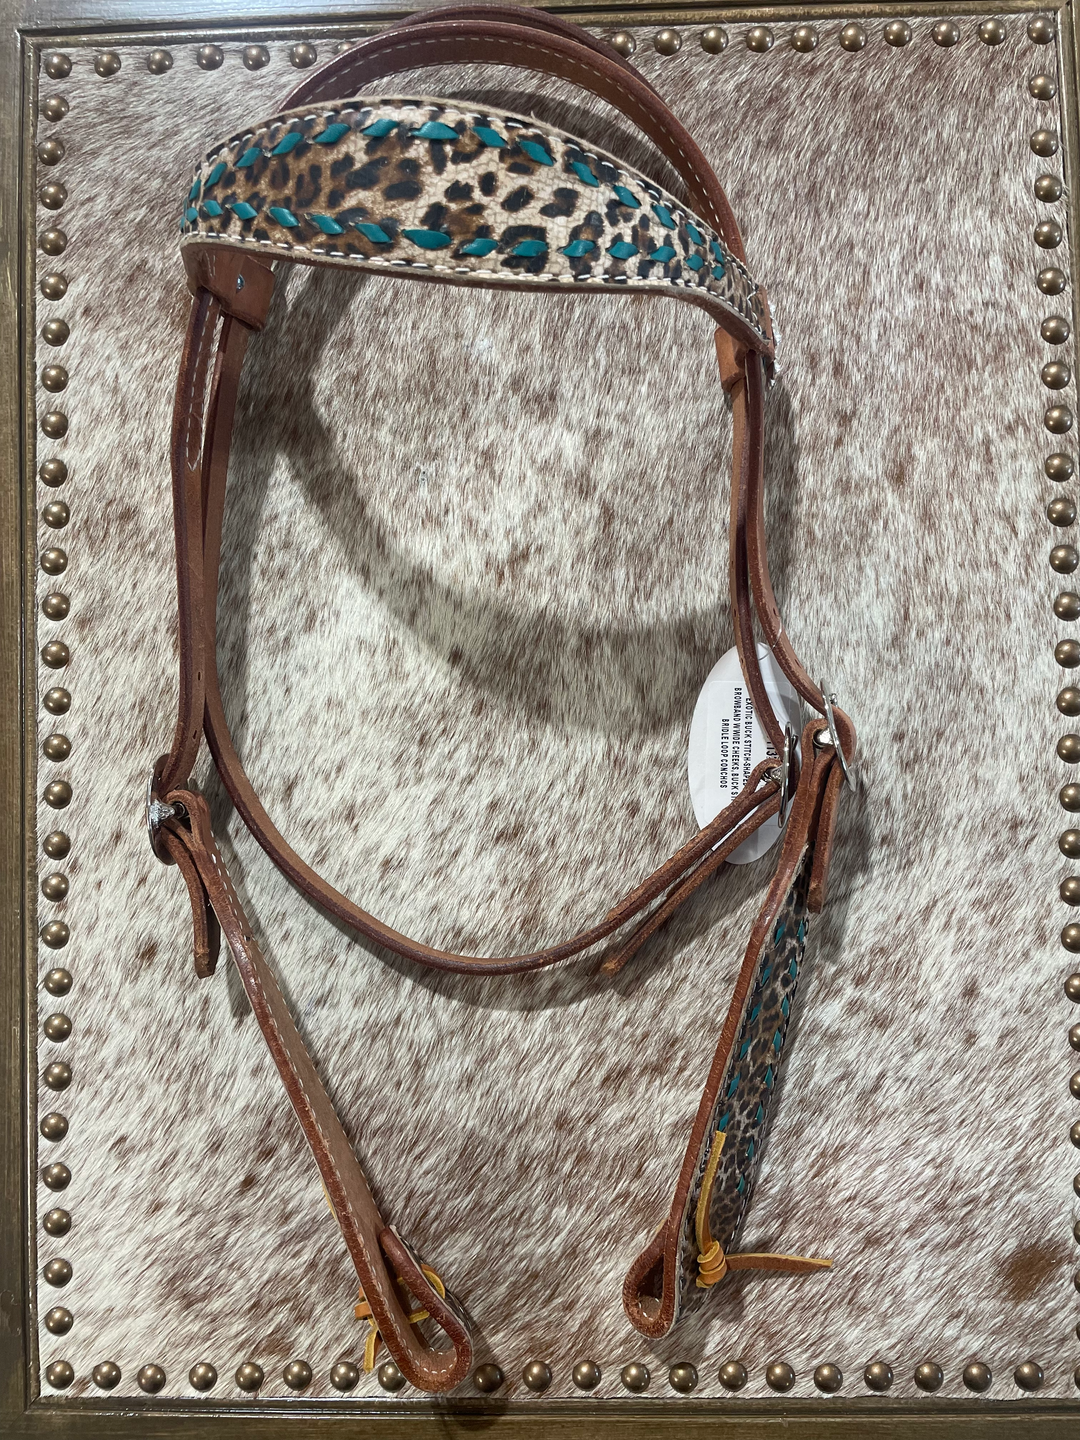 Leather Headstall, Cheetah and Lace